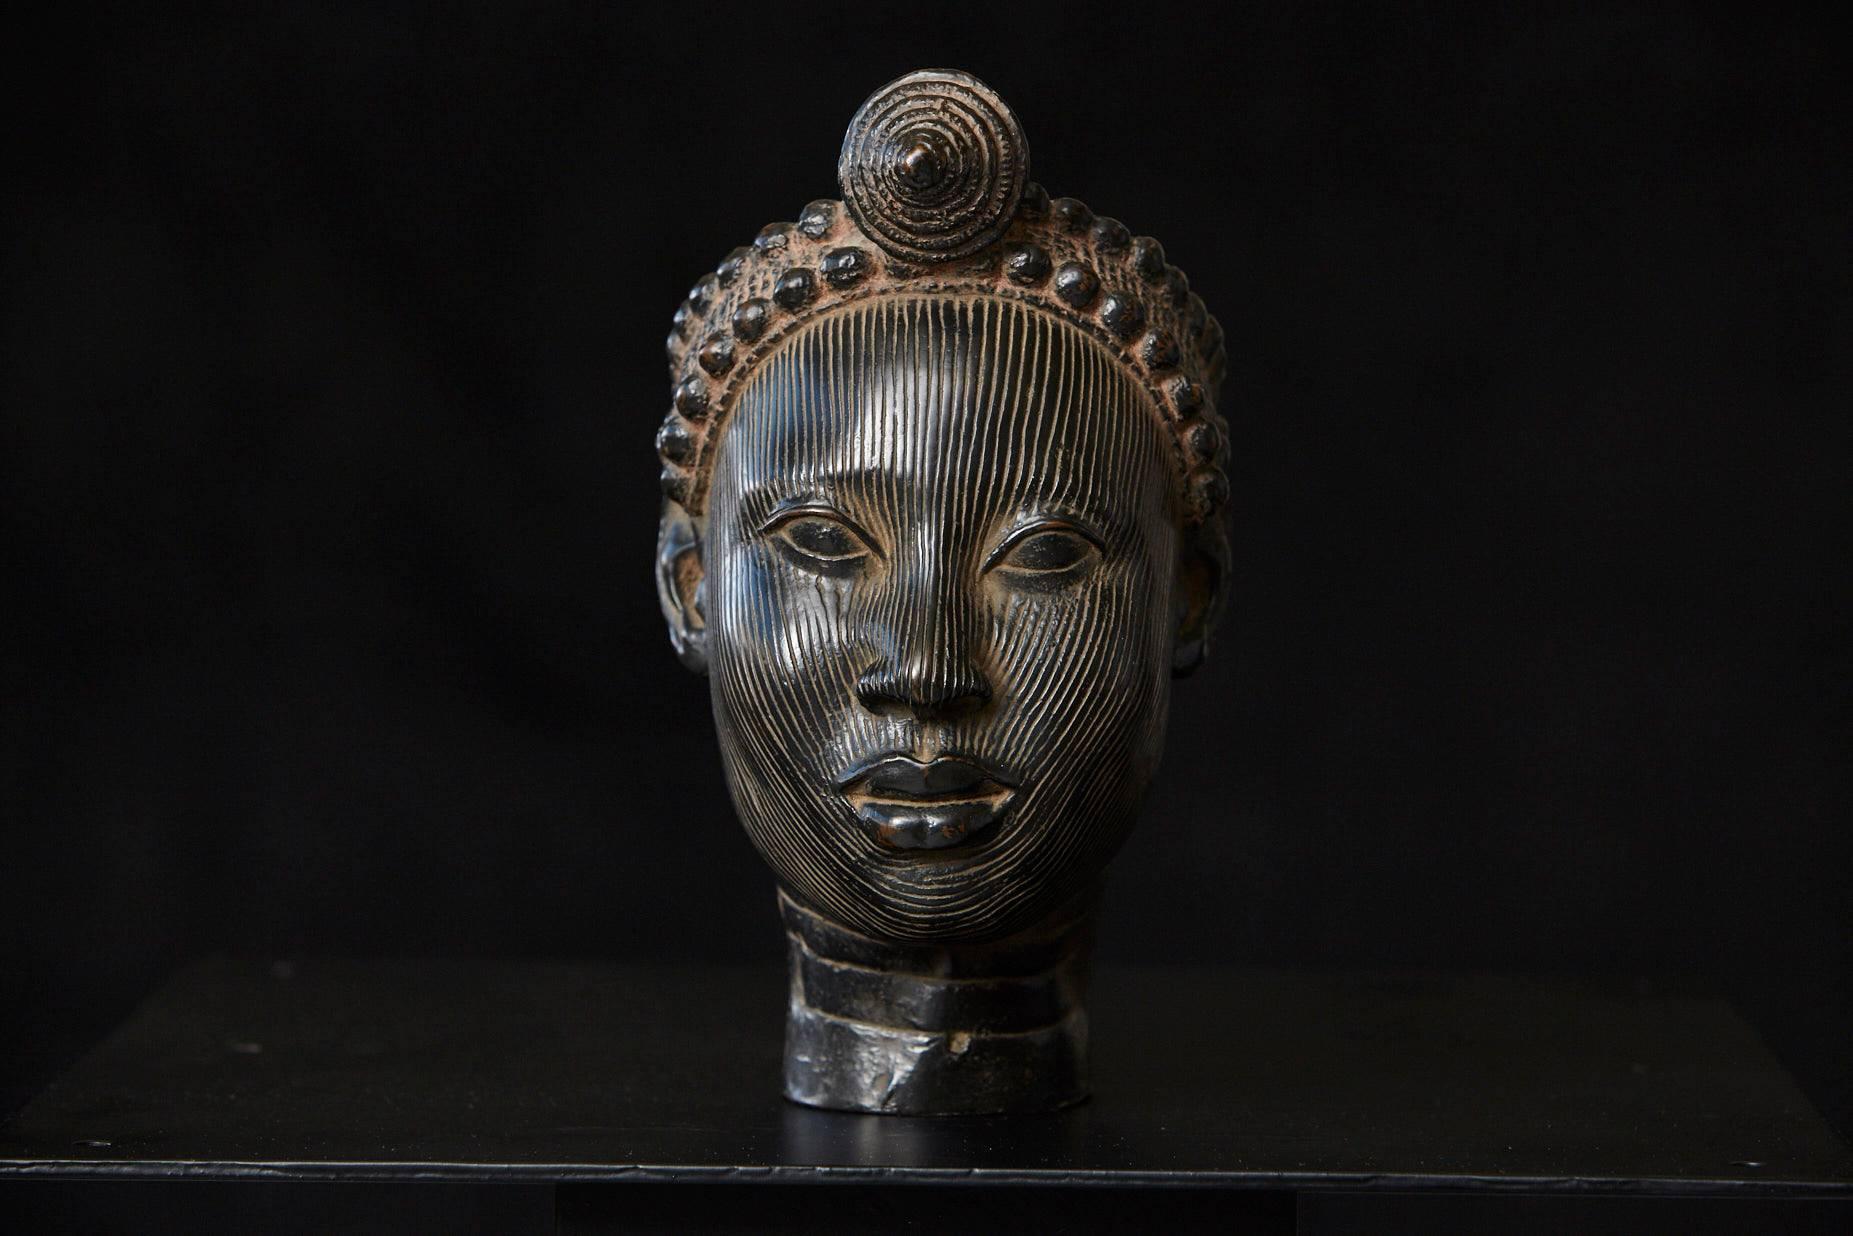 The excellent ceramic replica of a head with a crown, represents one of eighteen copper alloy sculptures that were unearthed in 1938 at Ife in Nigeria, the religious and former royal centre of the Yoruba people.
The original copper sculptures were